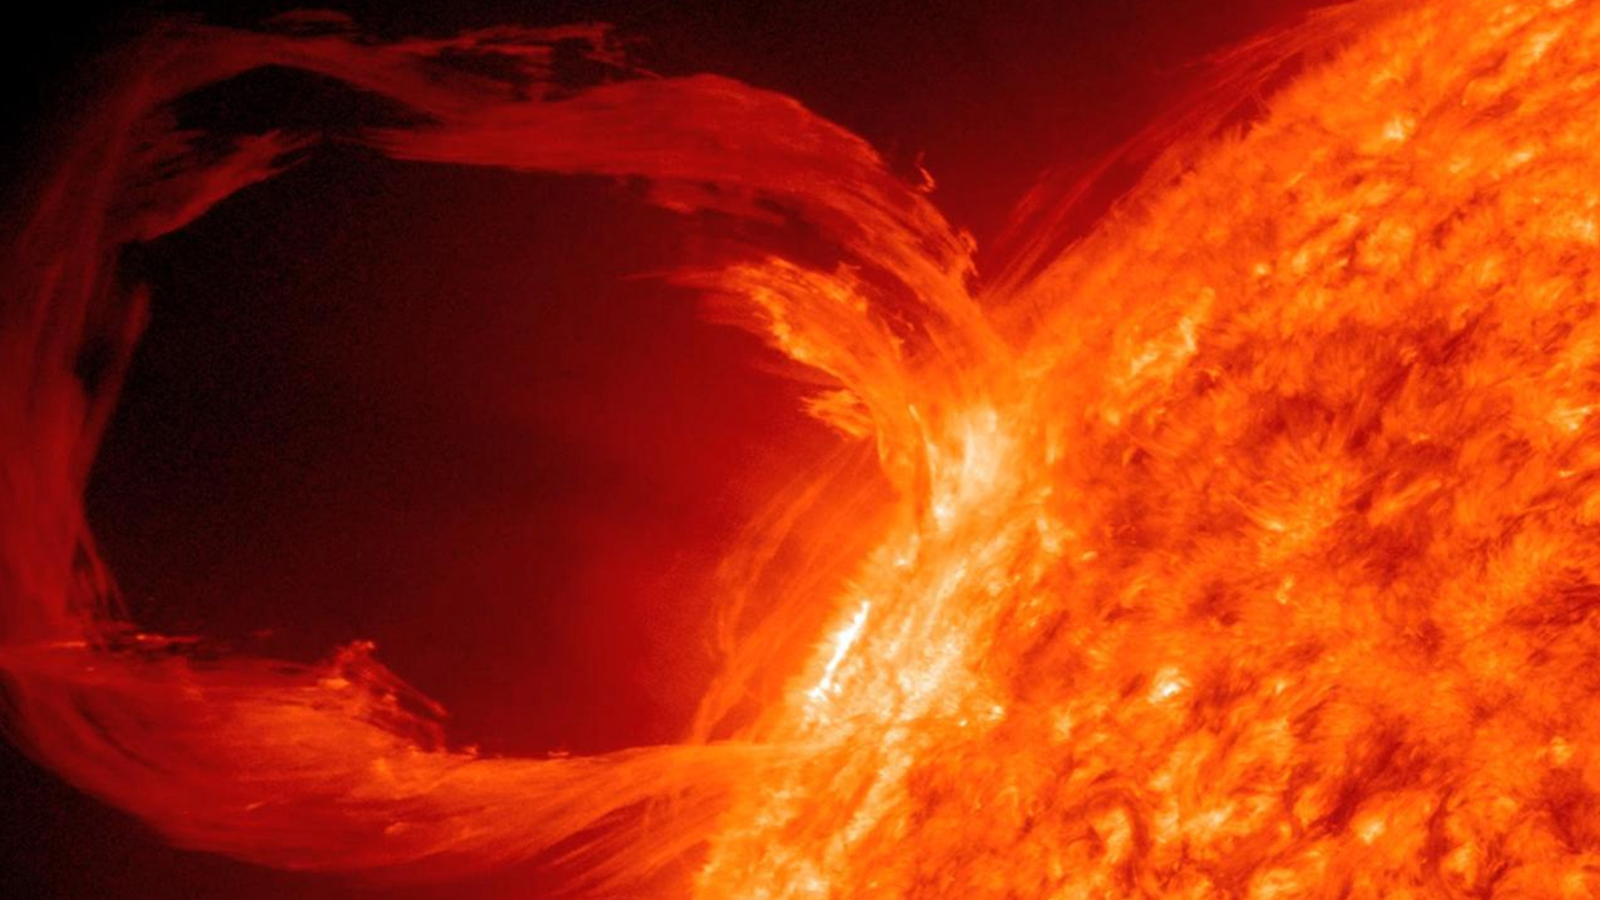 Scientists surprised as geomagnetic storm opens 'crack' in Earth's